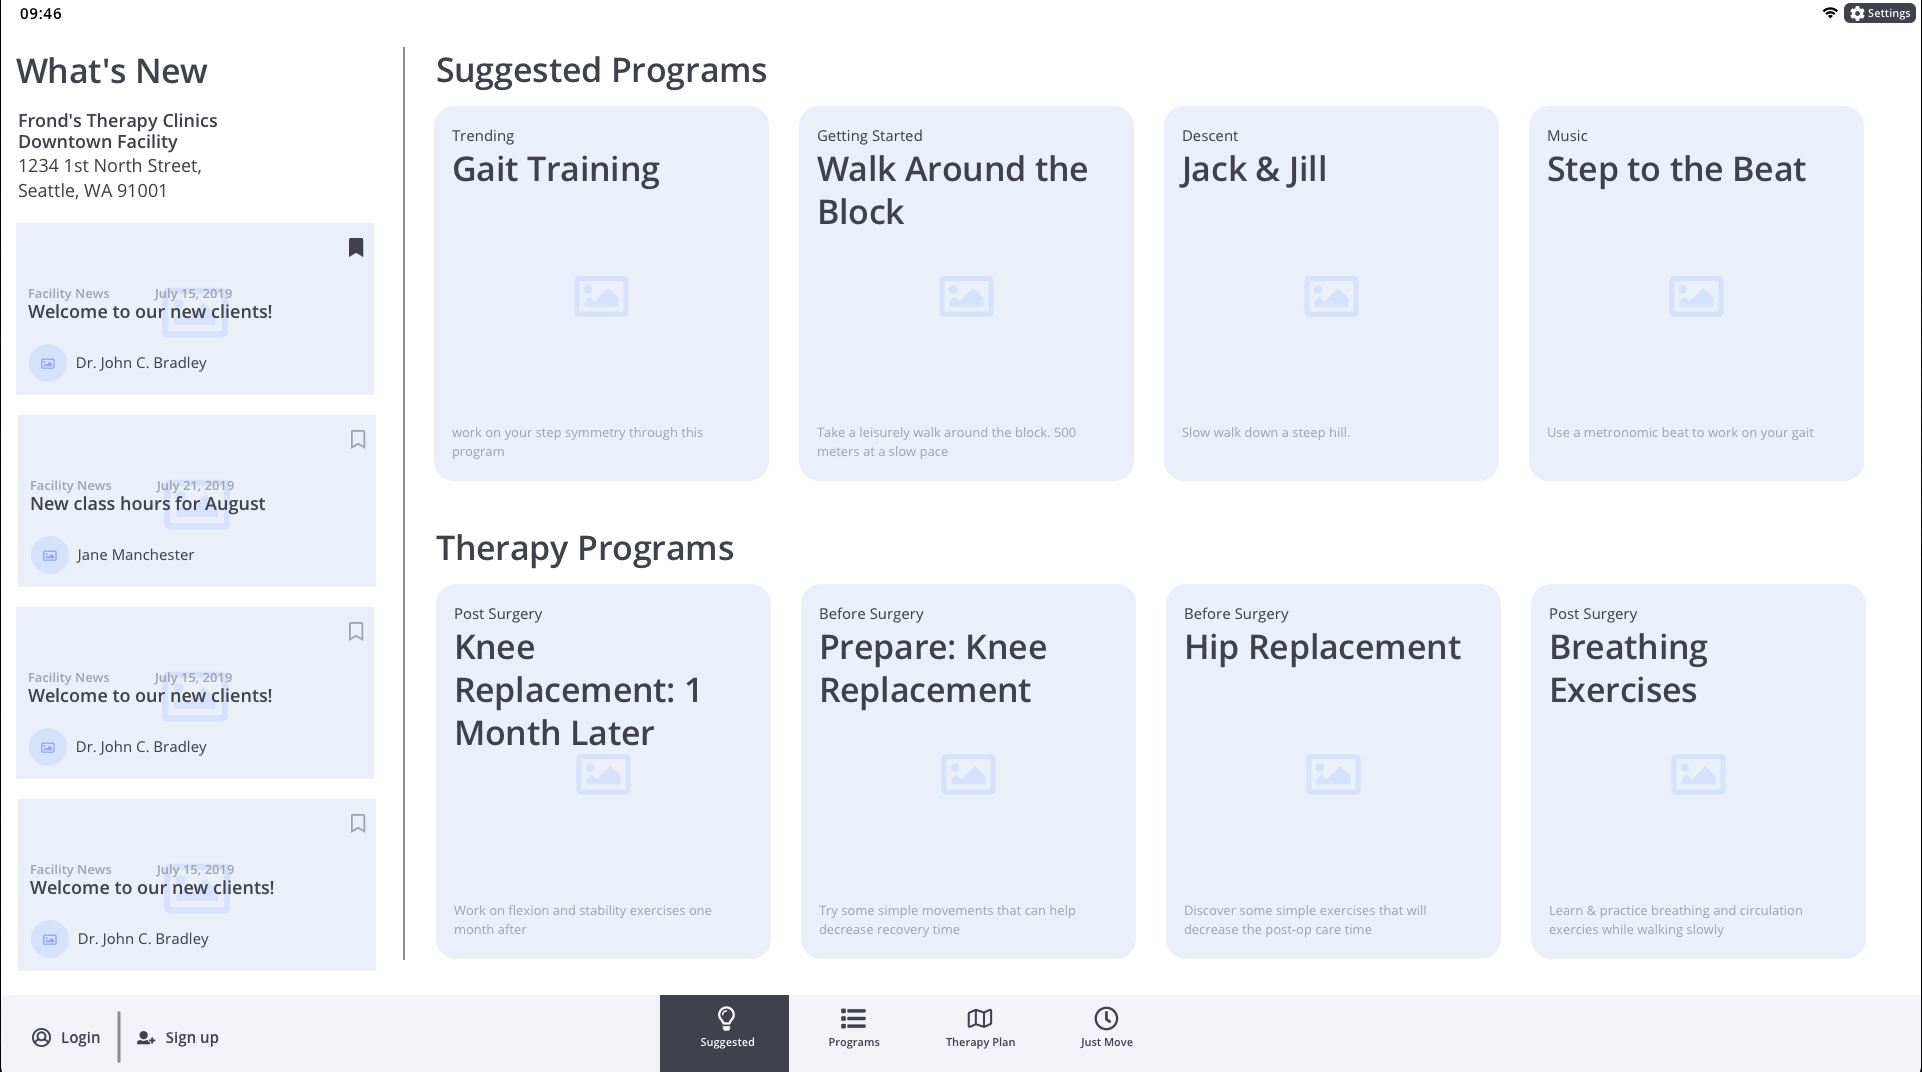 Patient / Provider Solution for Physical Therapy